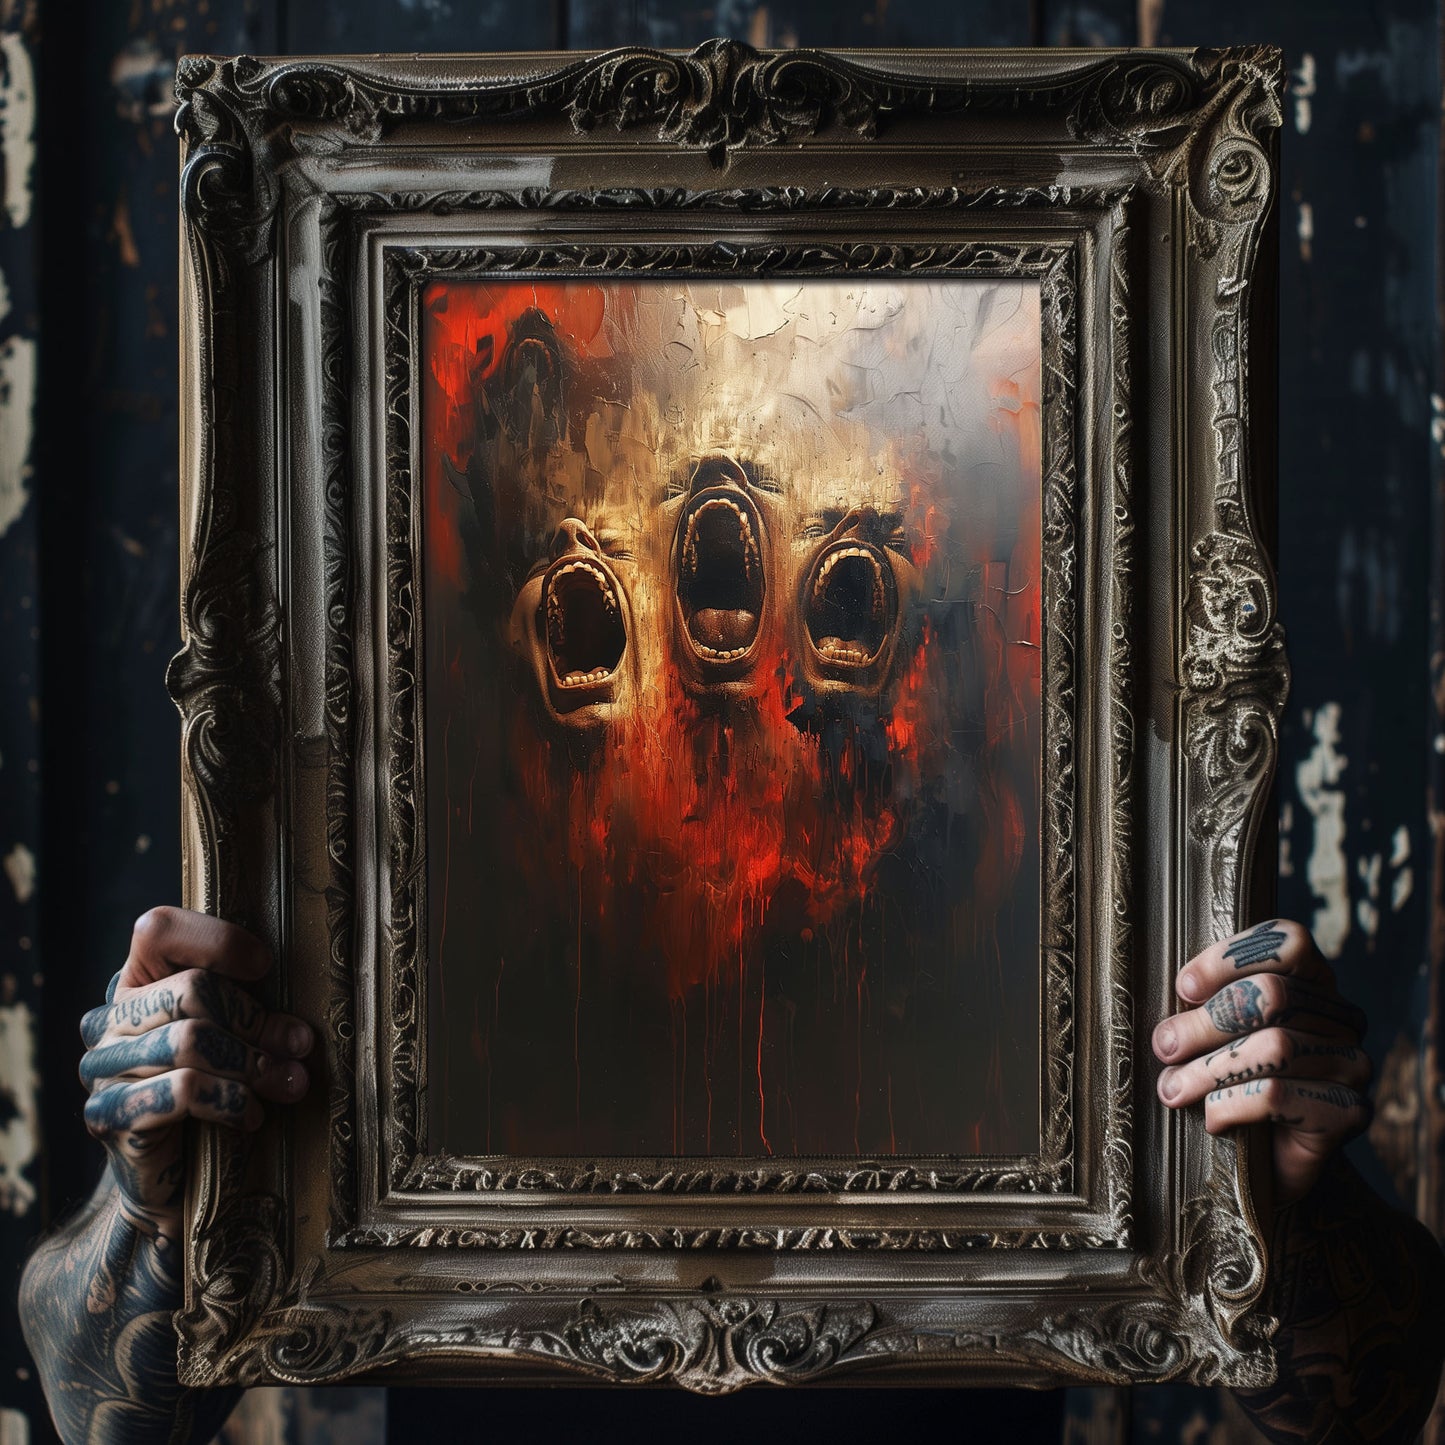 Screams from Hell Poster - Dark Gothic Oil Painting - Horror Art Print